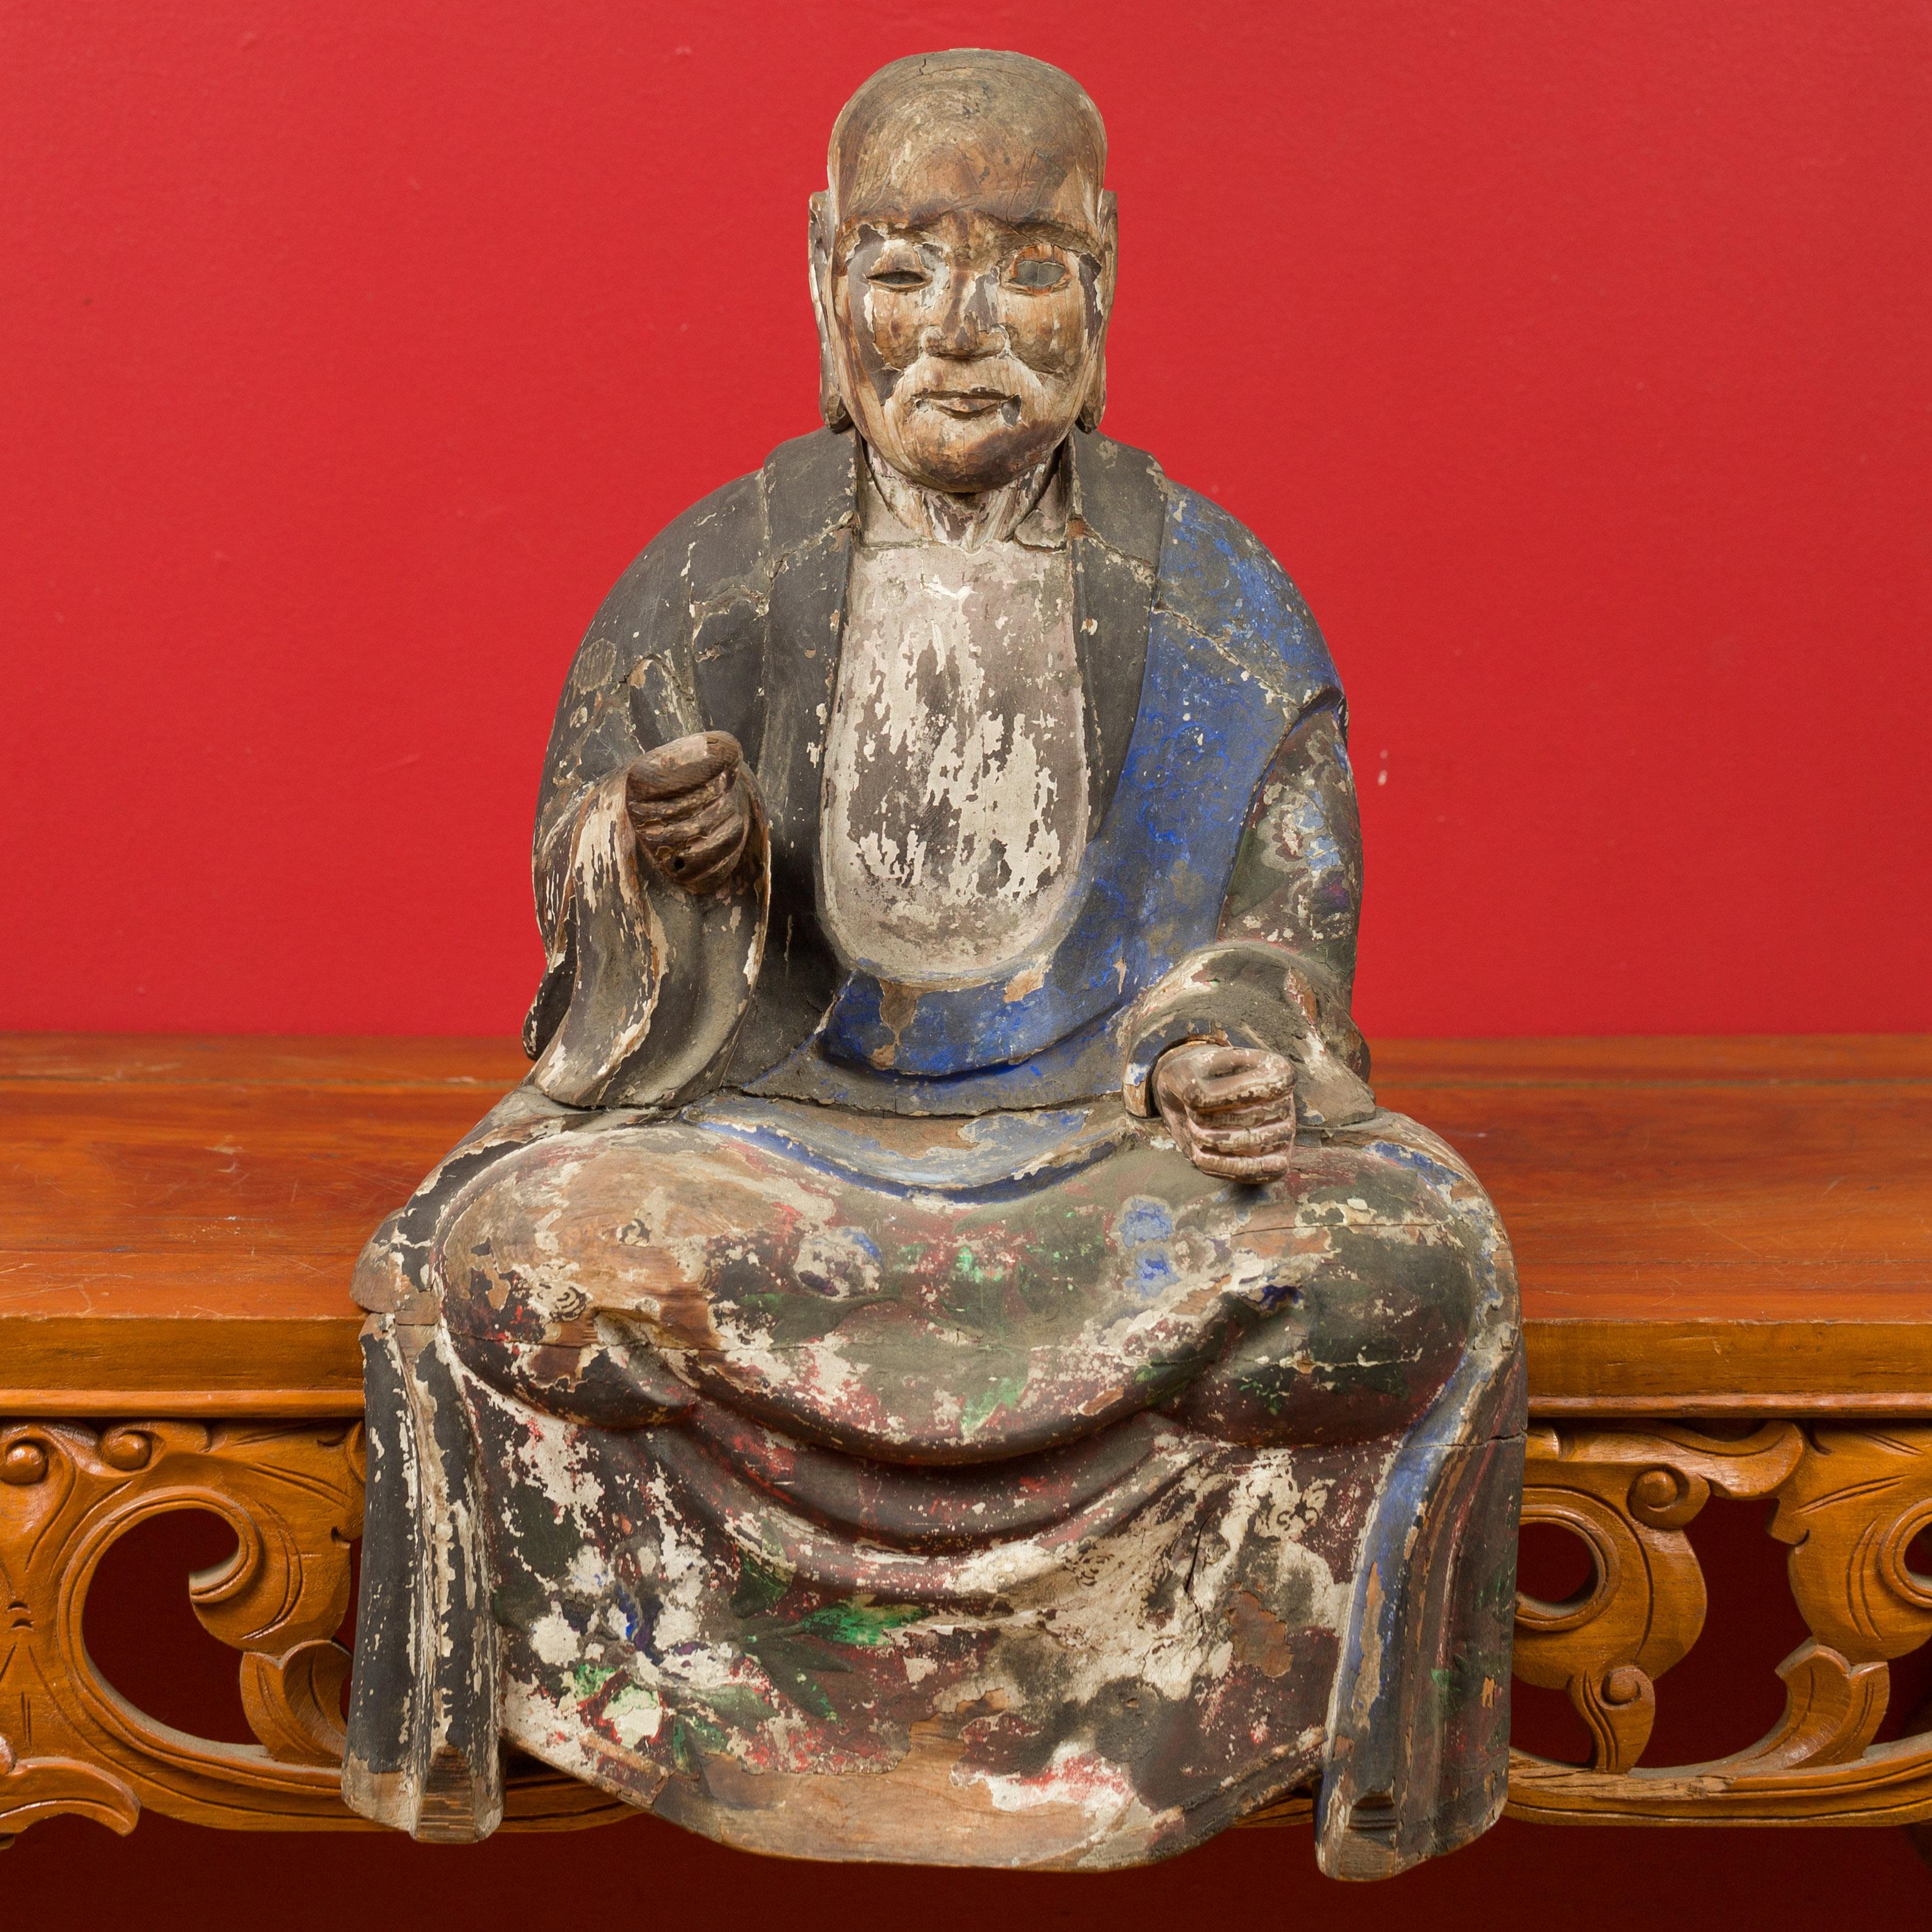 A Chinese Qing Dynasty period hand carved wooden seated Buddhist monk from the 19th century, with hand painted details and glass eyes. Born in China during the Qing Dynasty (1644-1912), this statue features a seated monk presenting traces of its